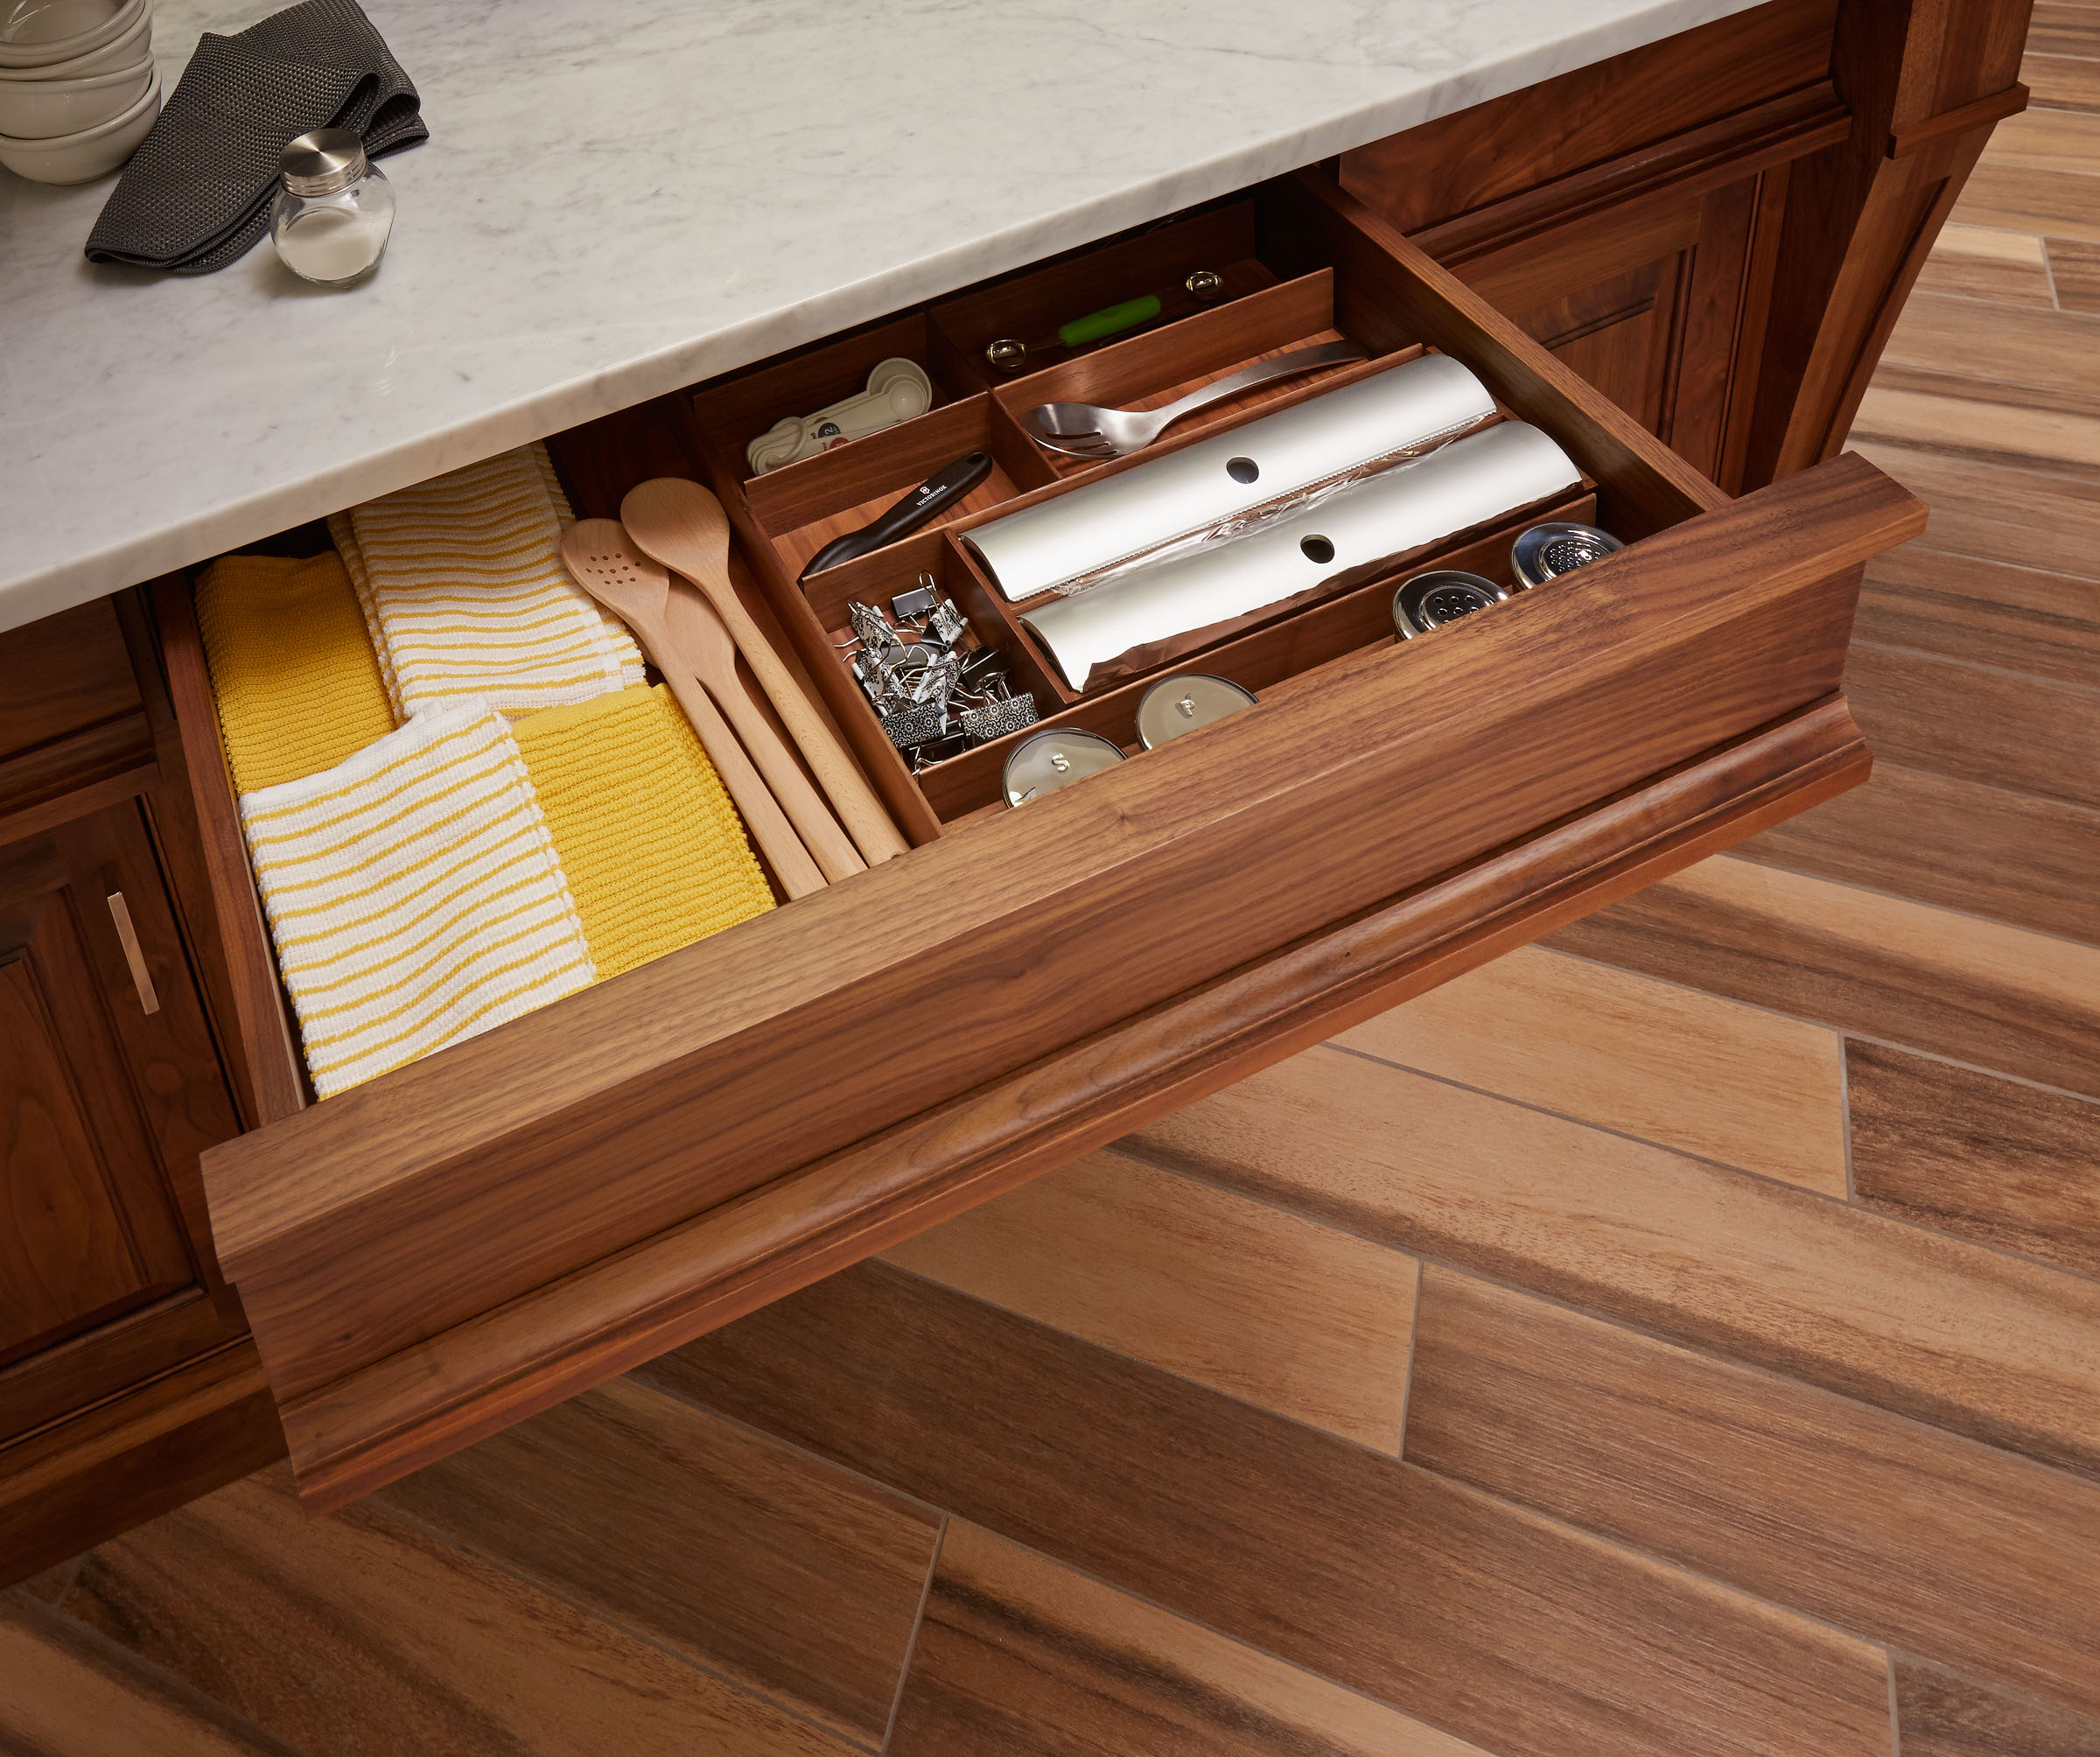 Walnut Deep Drawer Organizer with Dividers and a Deep Drawer